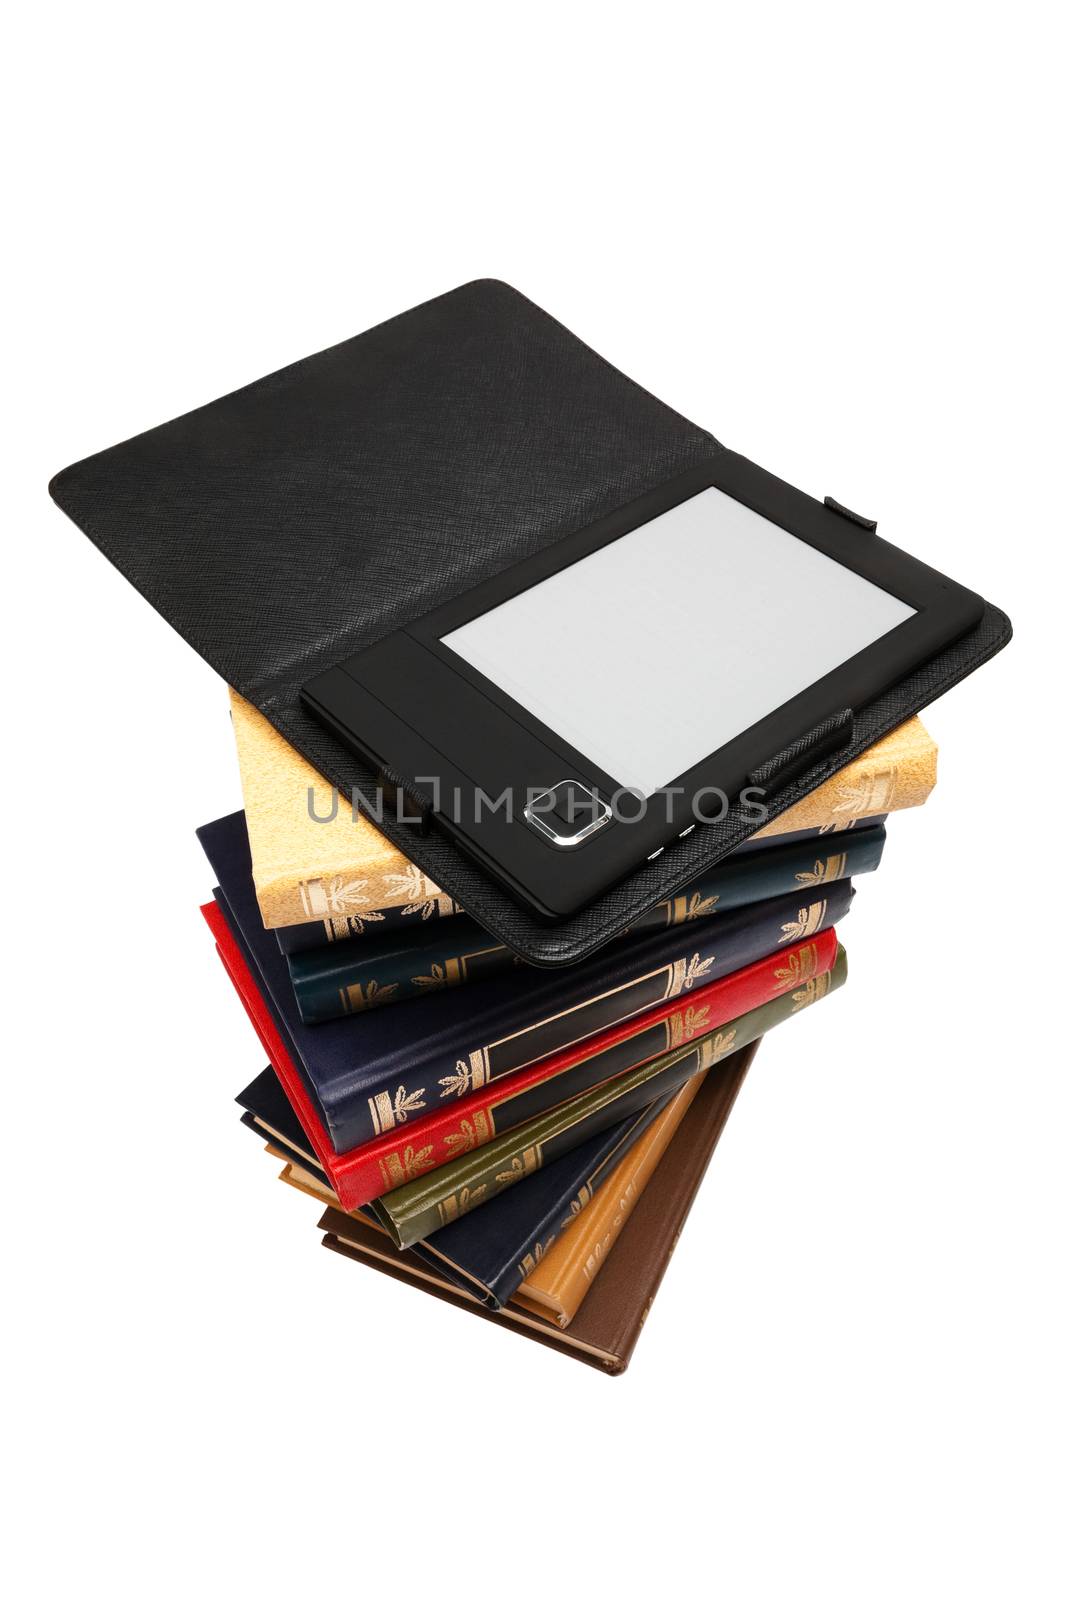 e-book and old books by terex